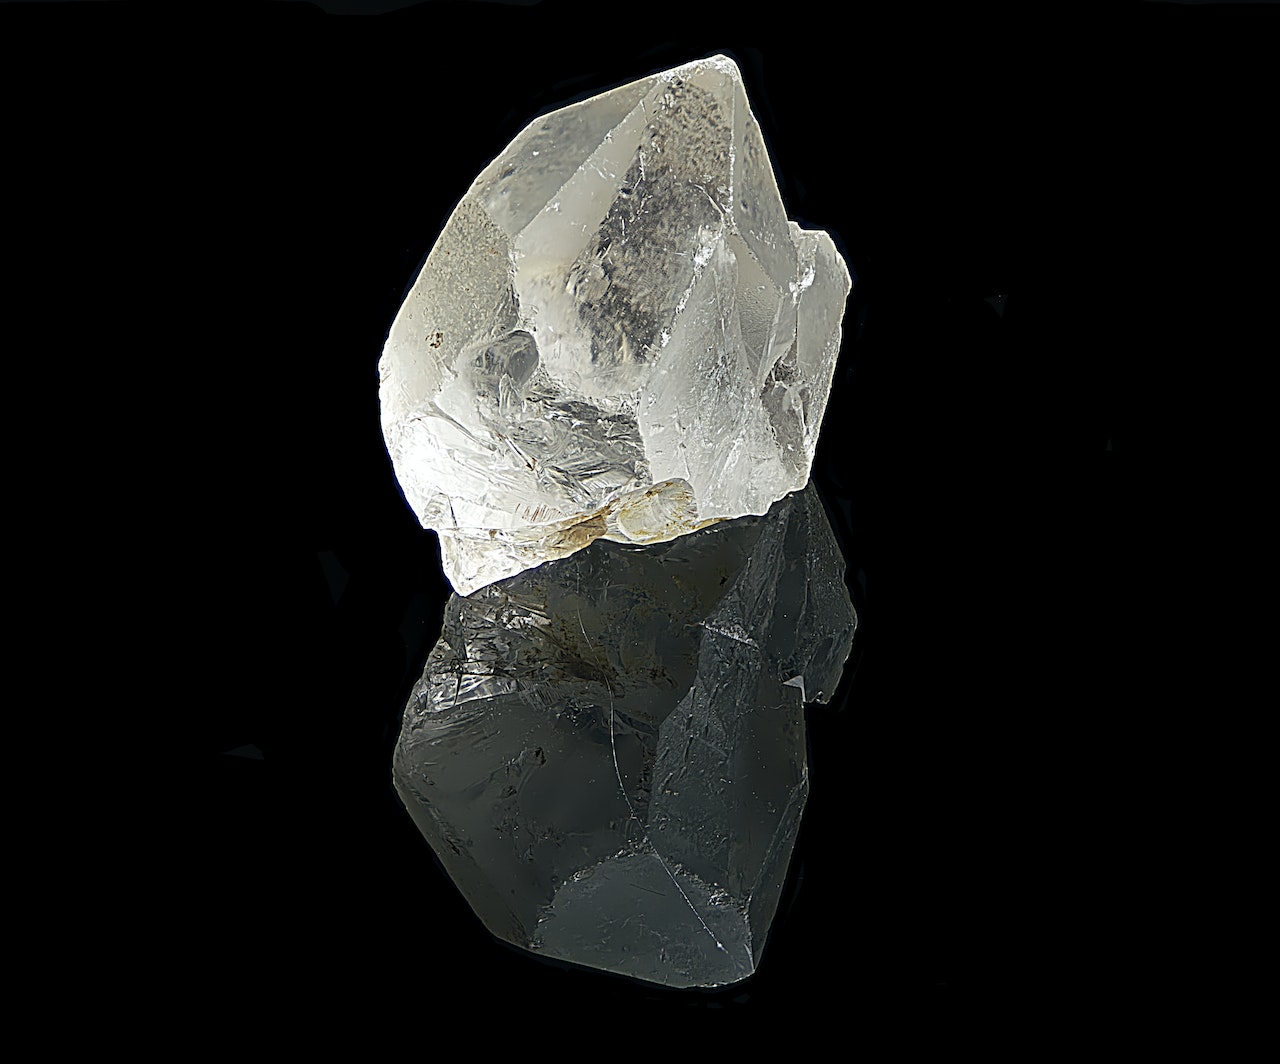 A quartz crystal used for vibrational healing